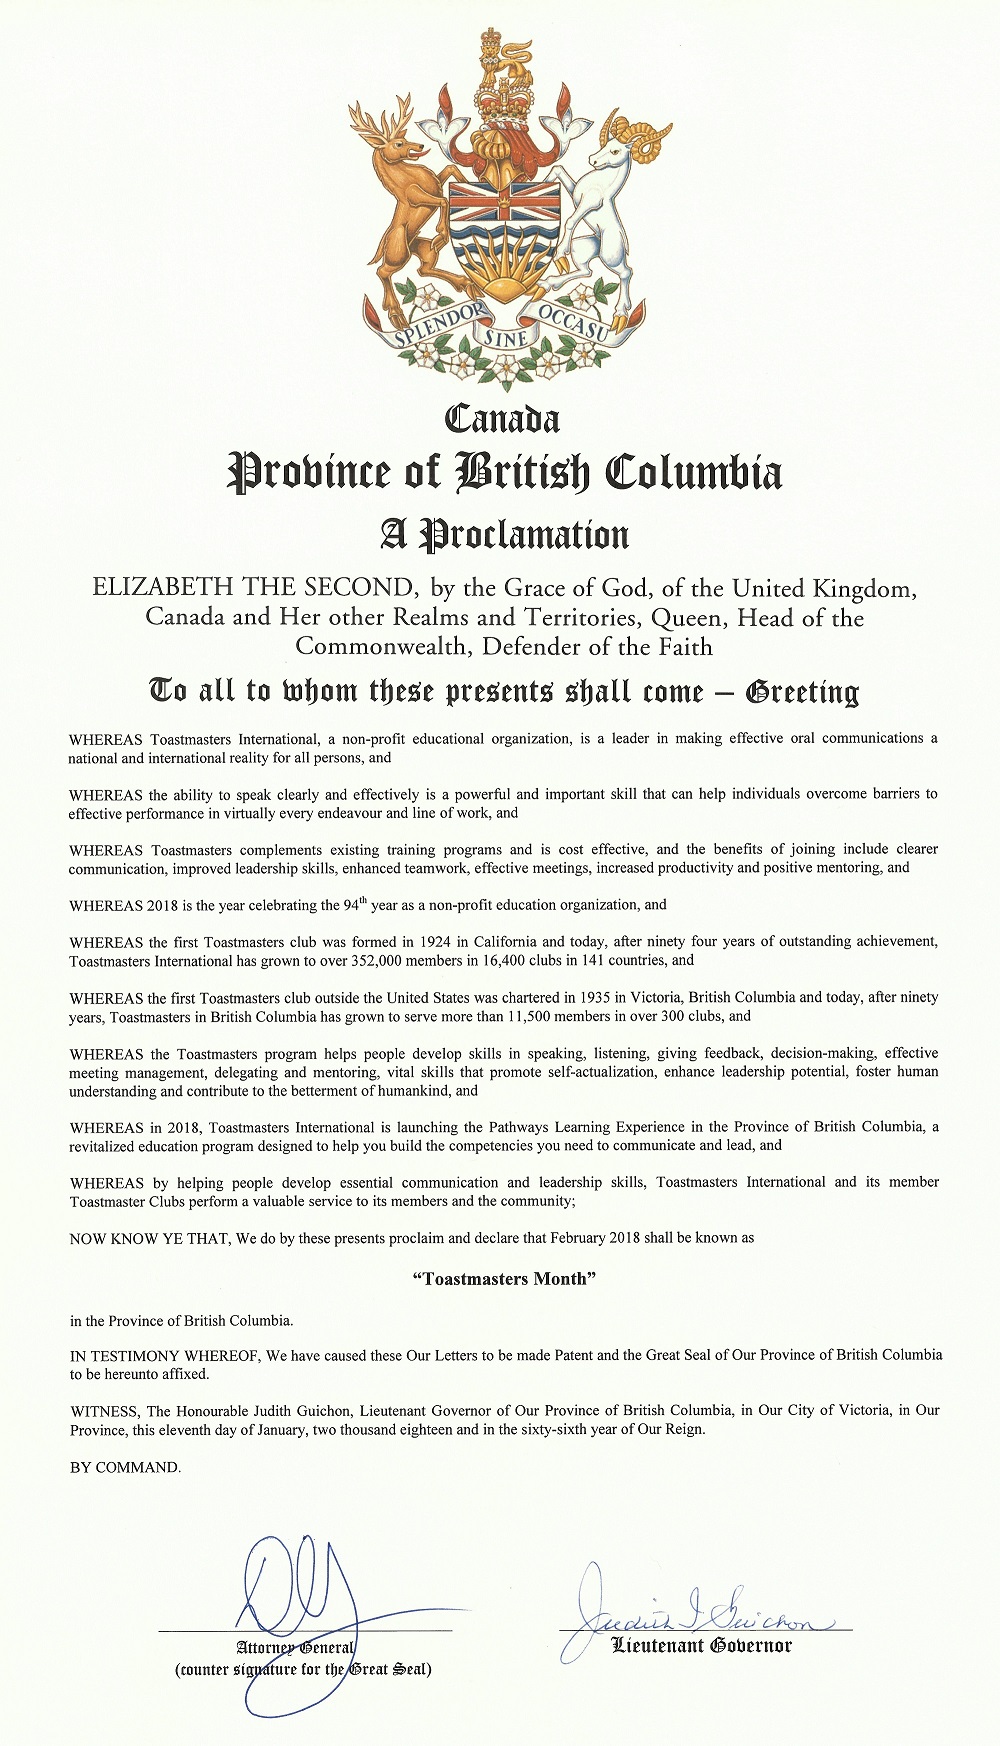 Province of British Columbia Proclamation Proclaiming that February 2018 shall be known as "Toastmasters Month" in the Province of British Columbia!